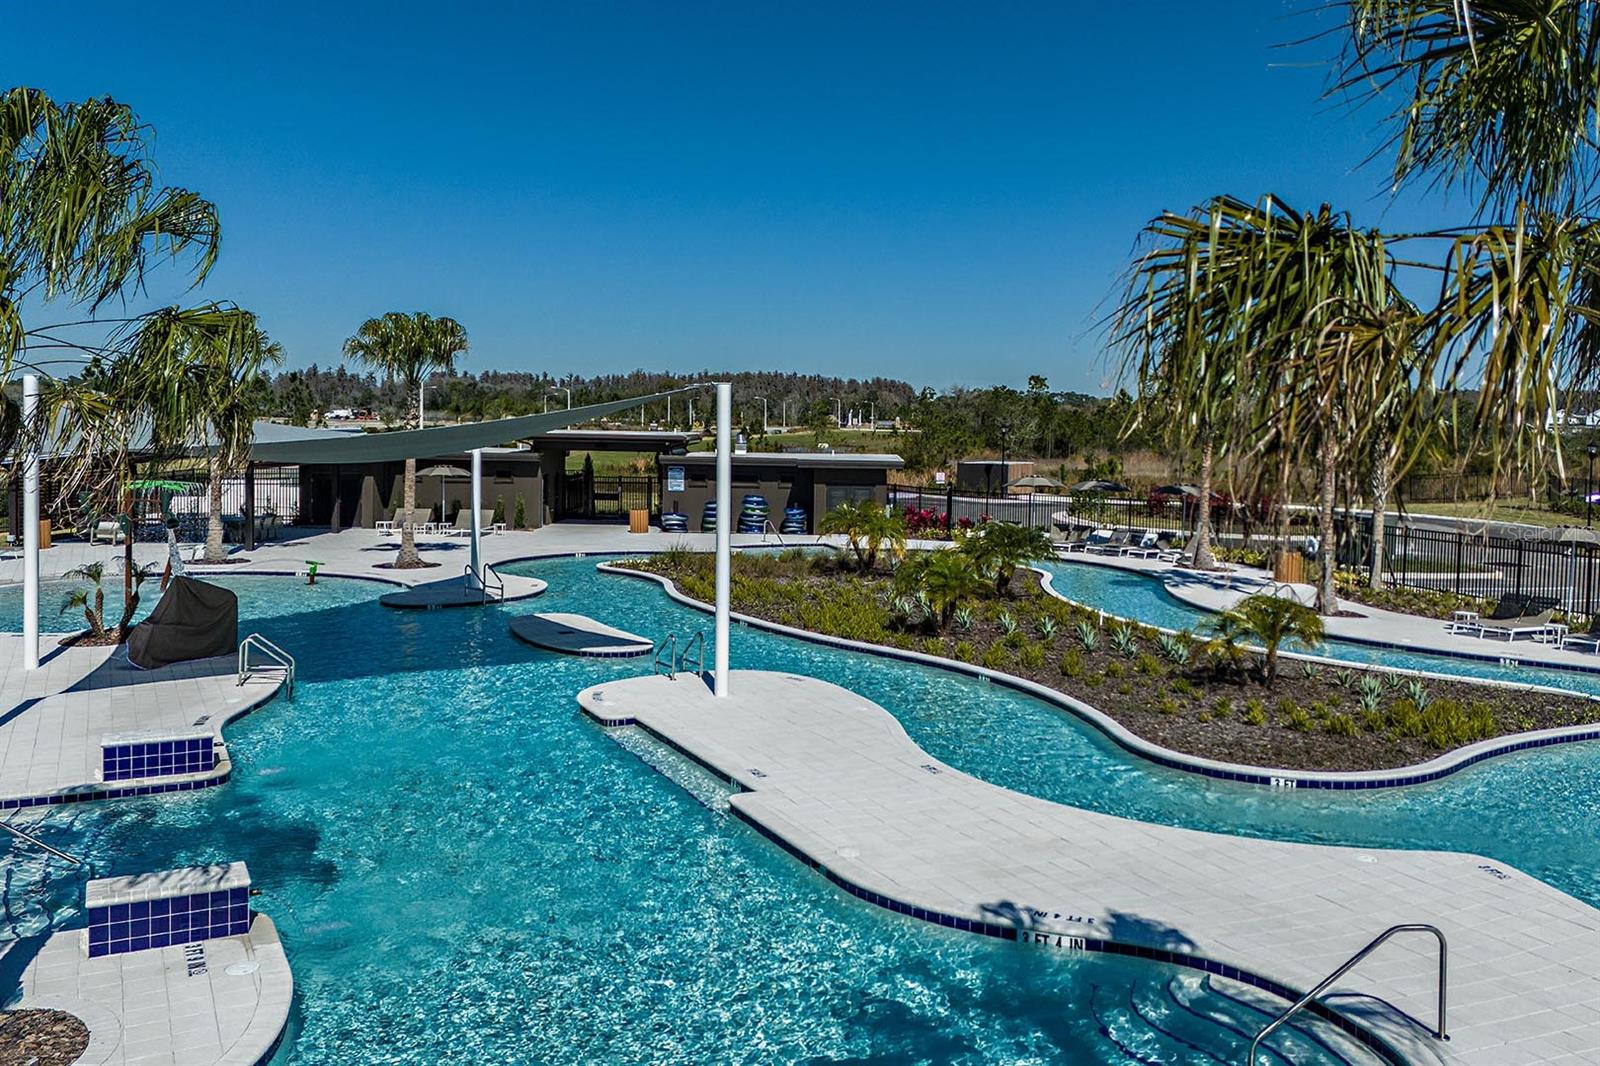 Lazy River at Master Planned Community Amenites Center